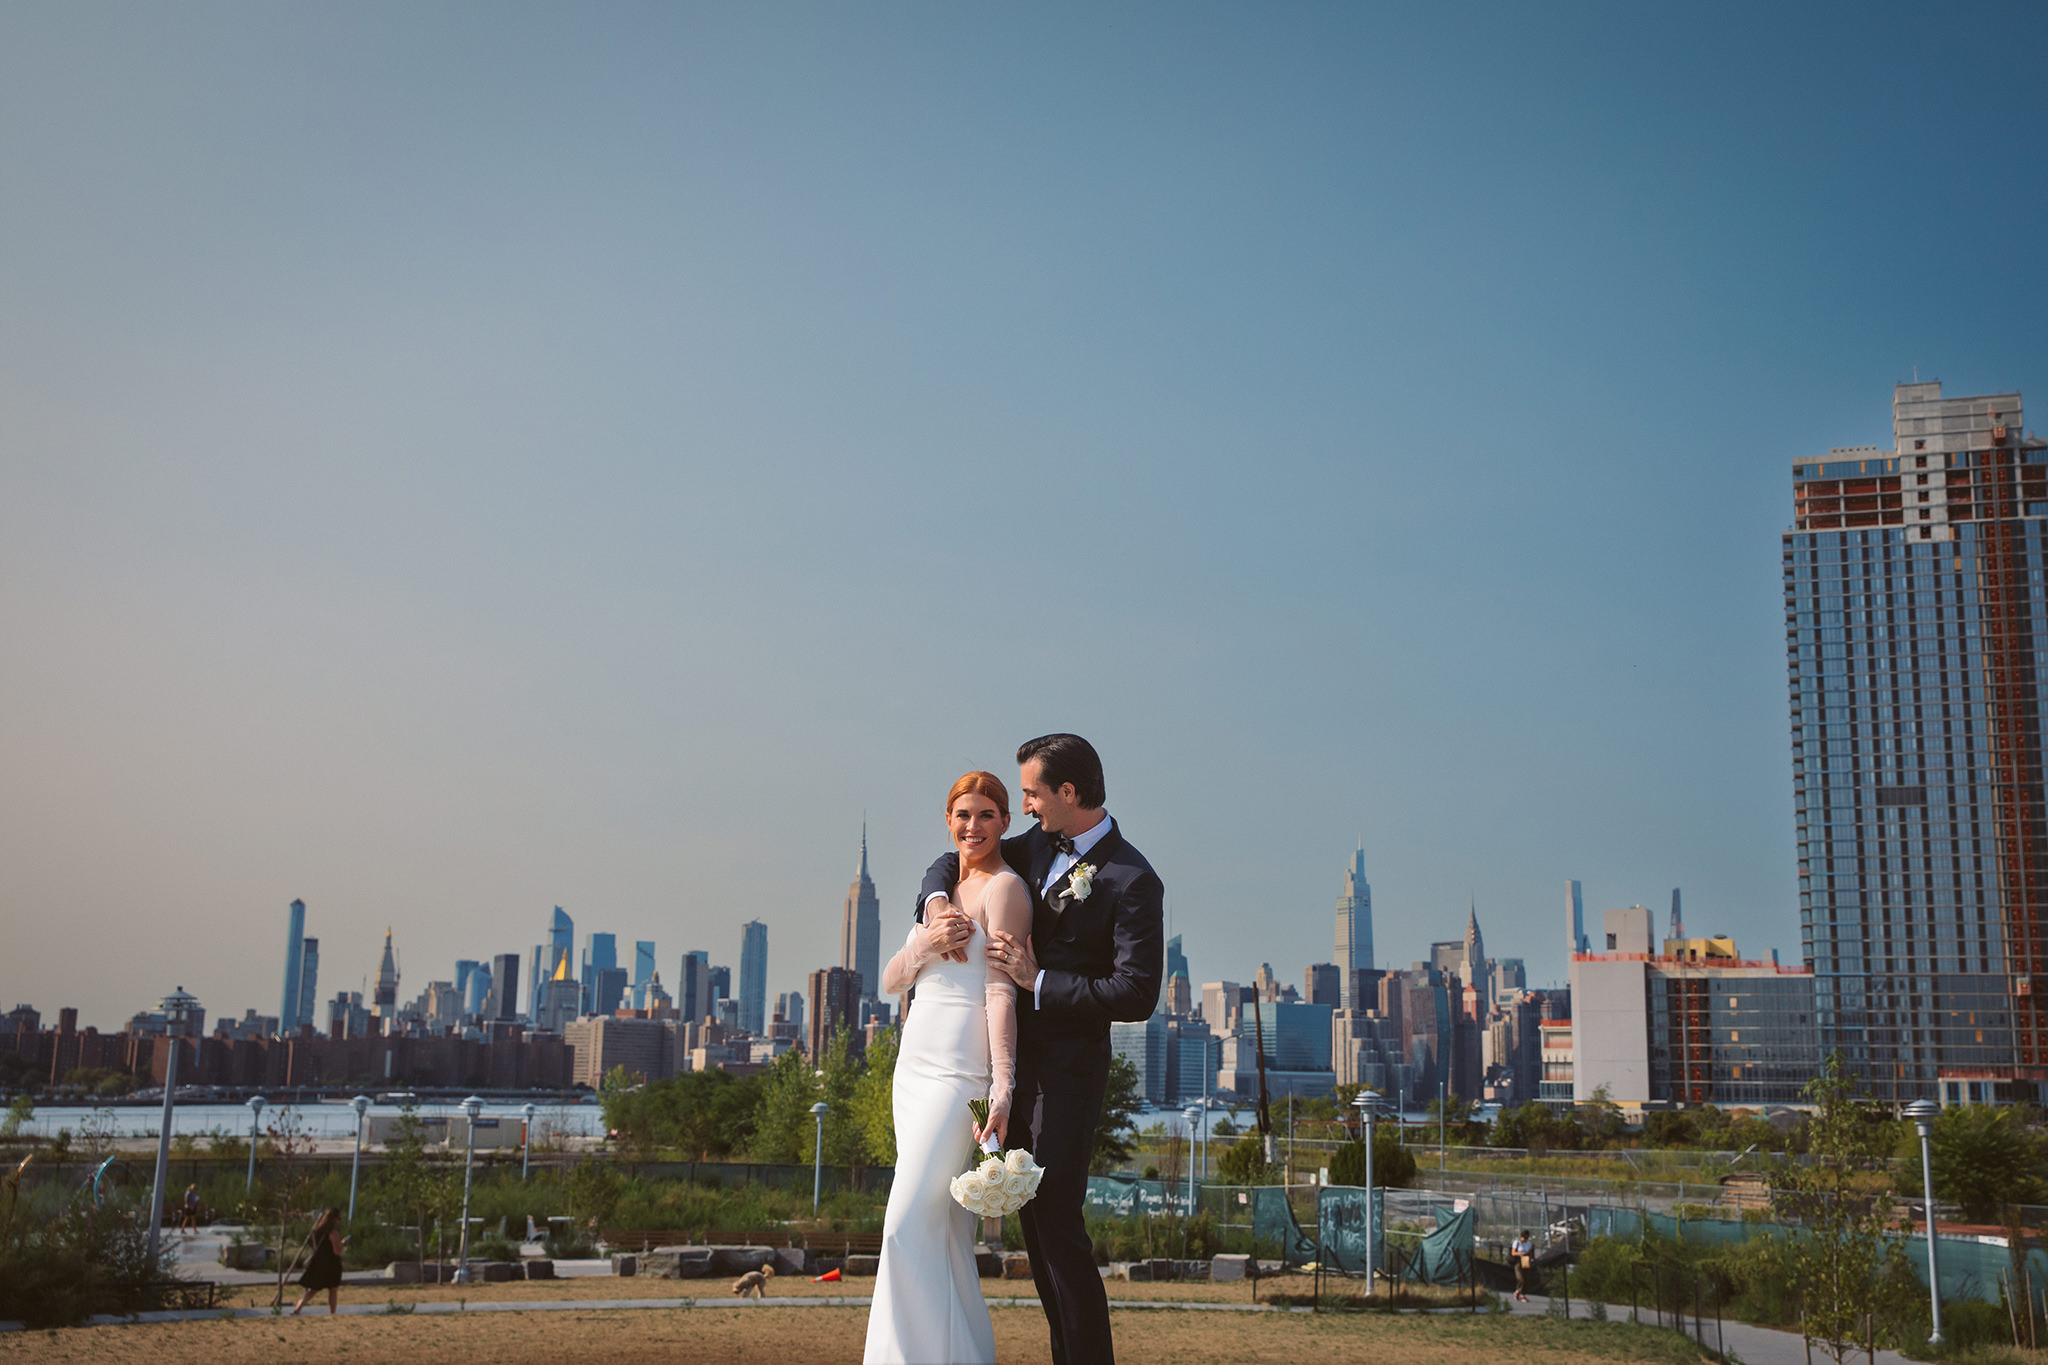 A sunny wedding portrait of a bride and groom with the New York City skyline in the background